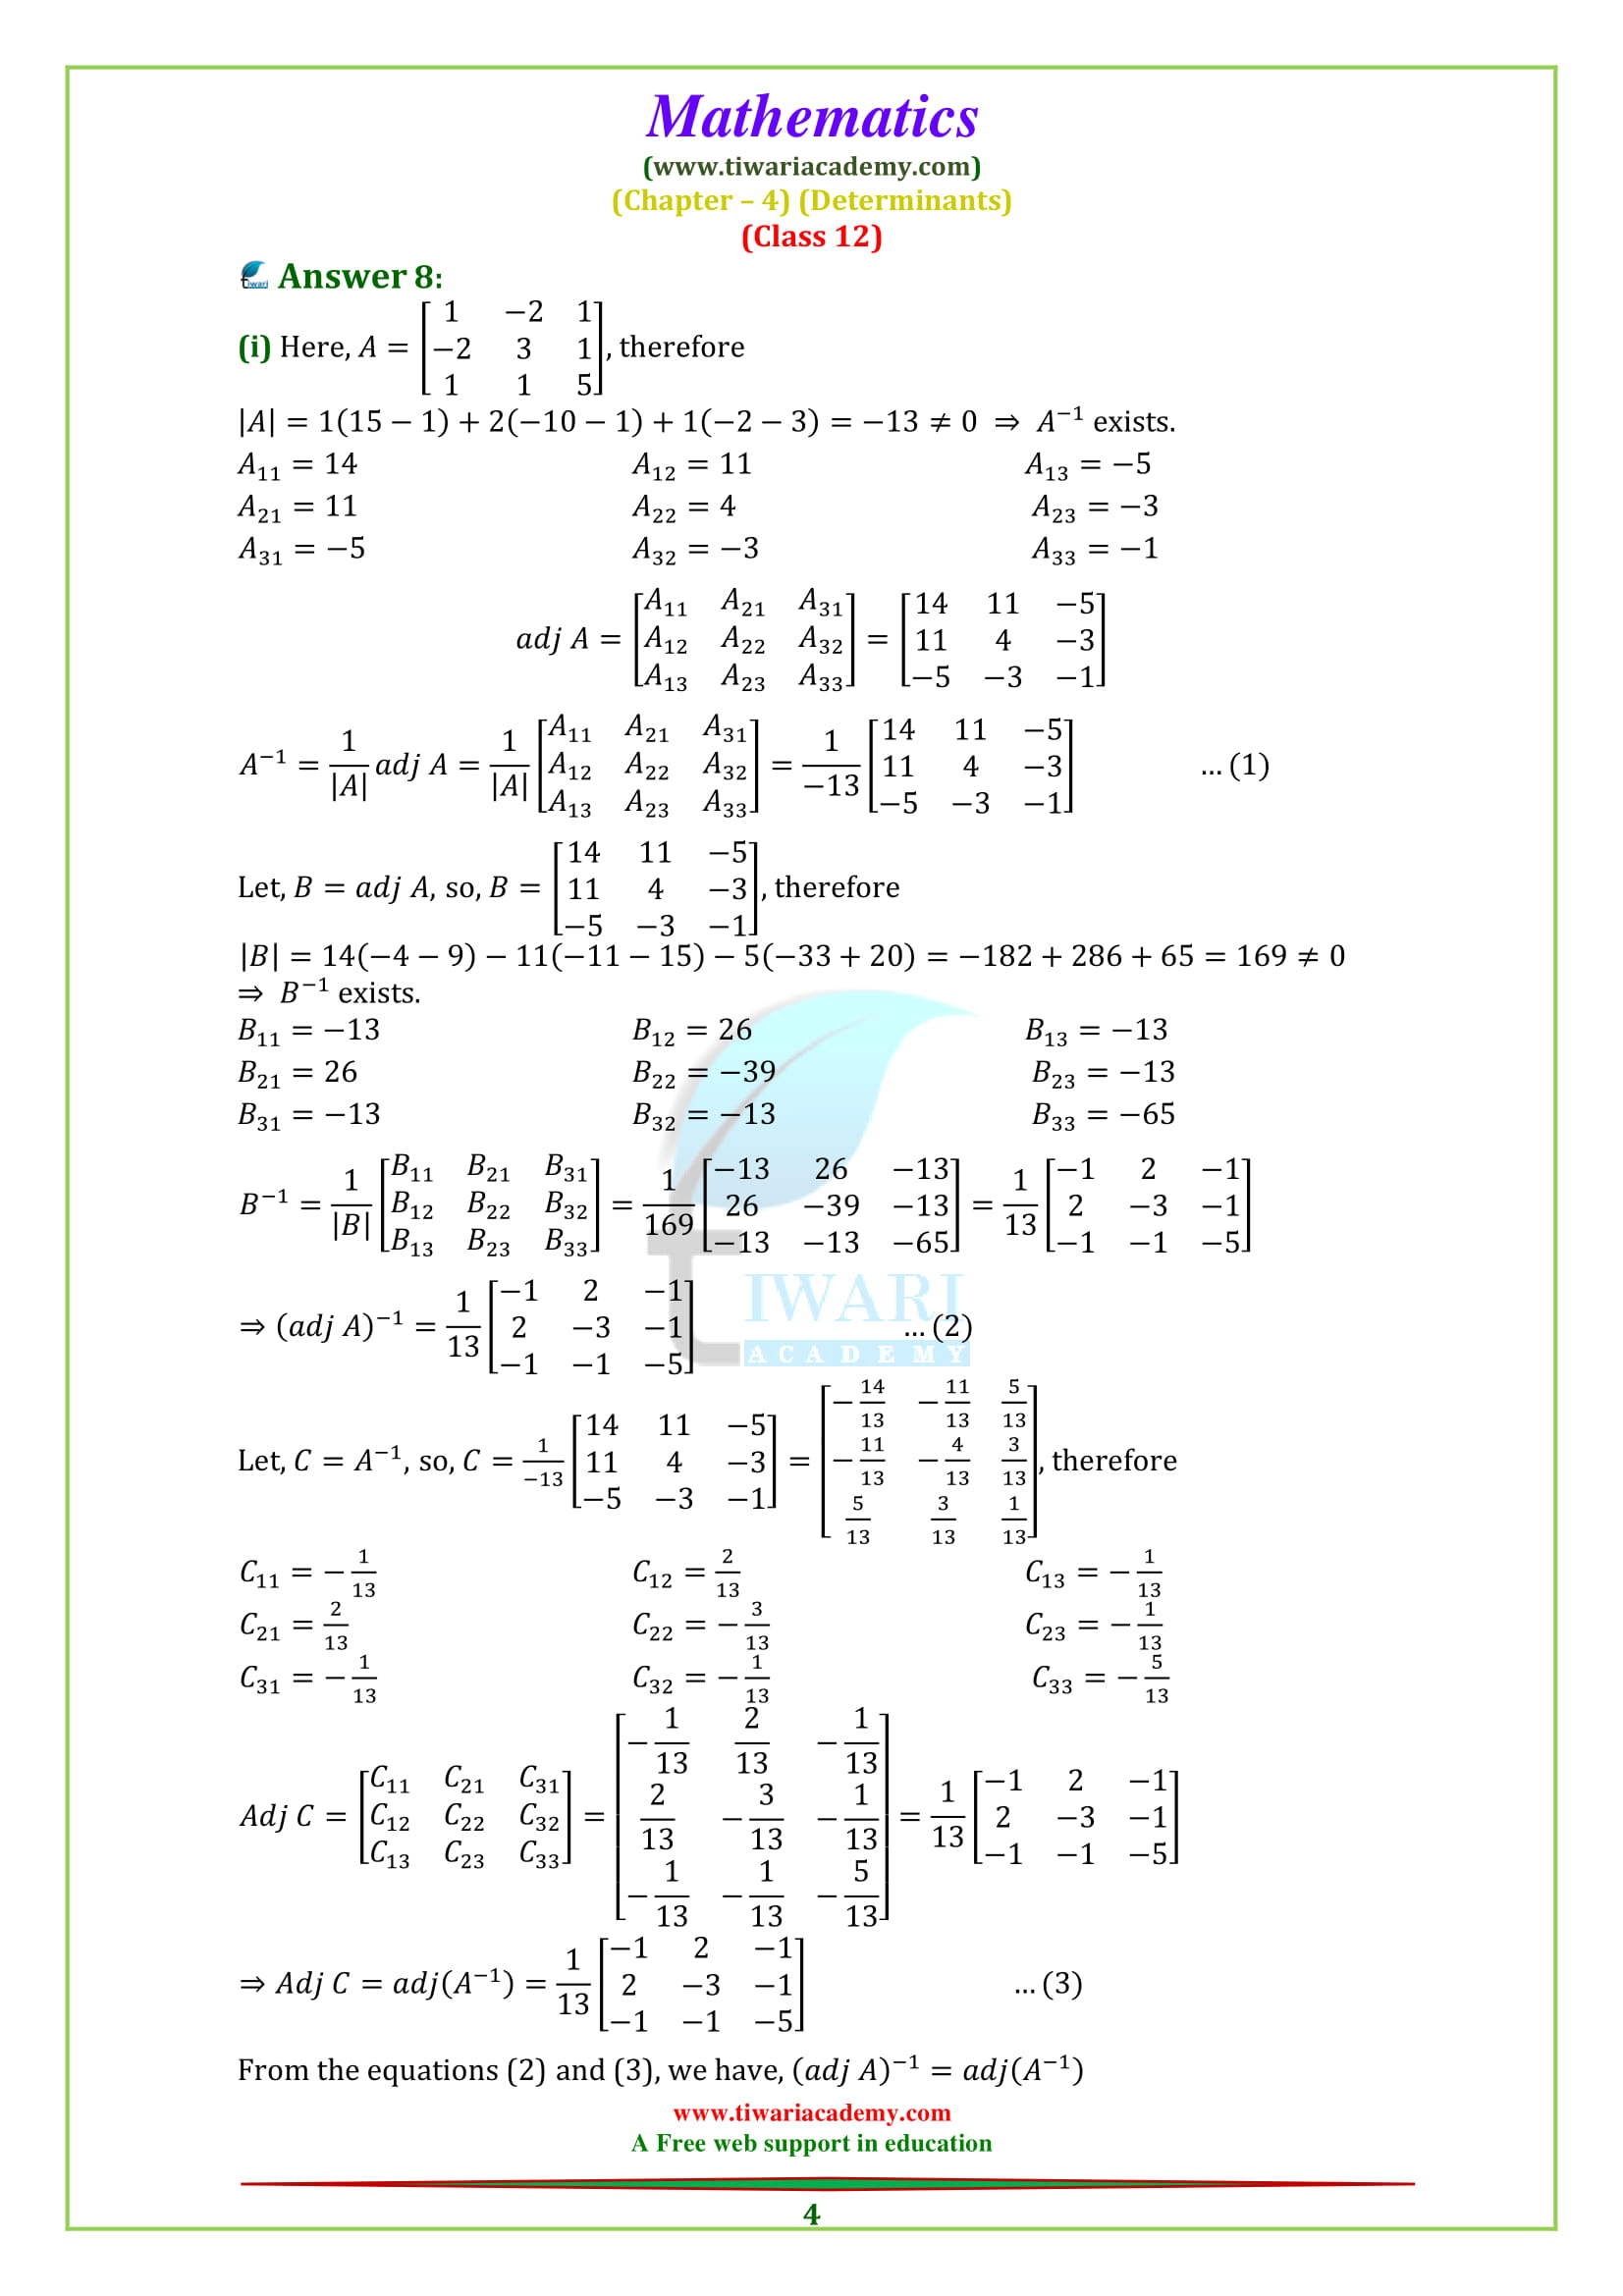 12 Maths Chapter 4 Miscellaneous Exercise 4 solutions for CBSE and UP Board